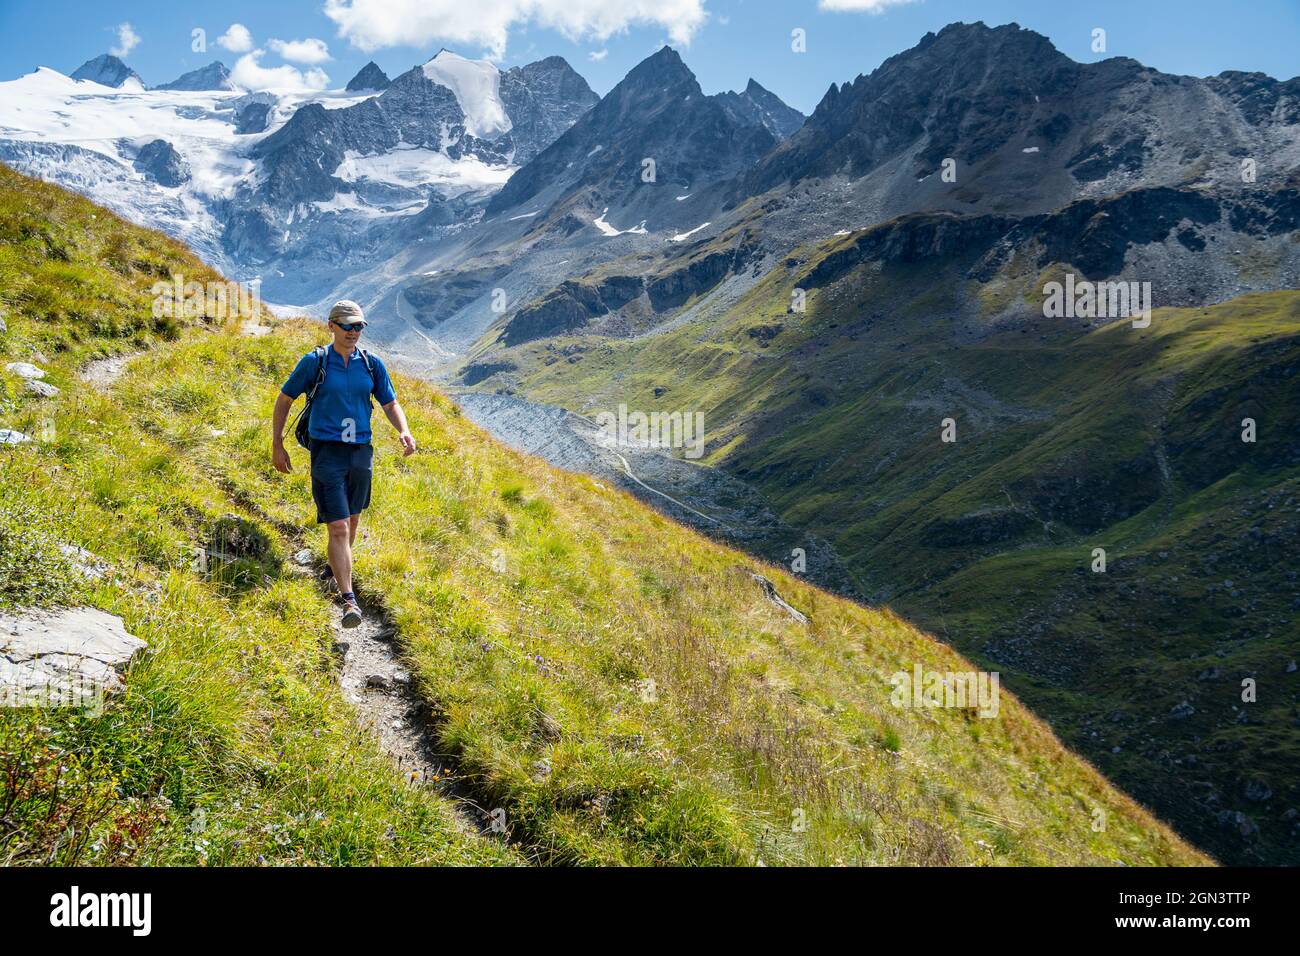 A single male hiker strides out across the Swiss mountains with glaciers in the background. Moiry Valley, Grimentz, Valais Switzerland Stock Photo